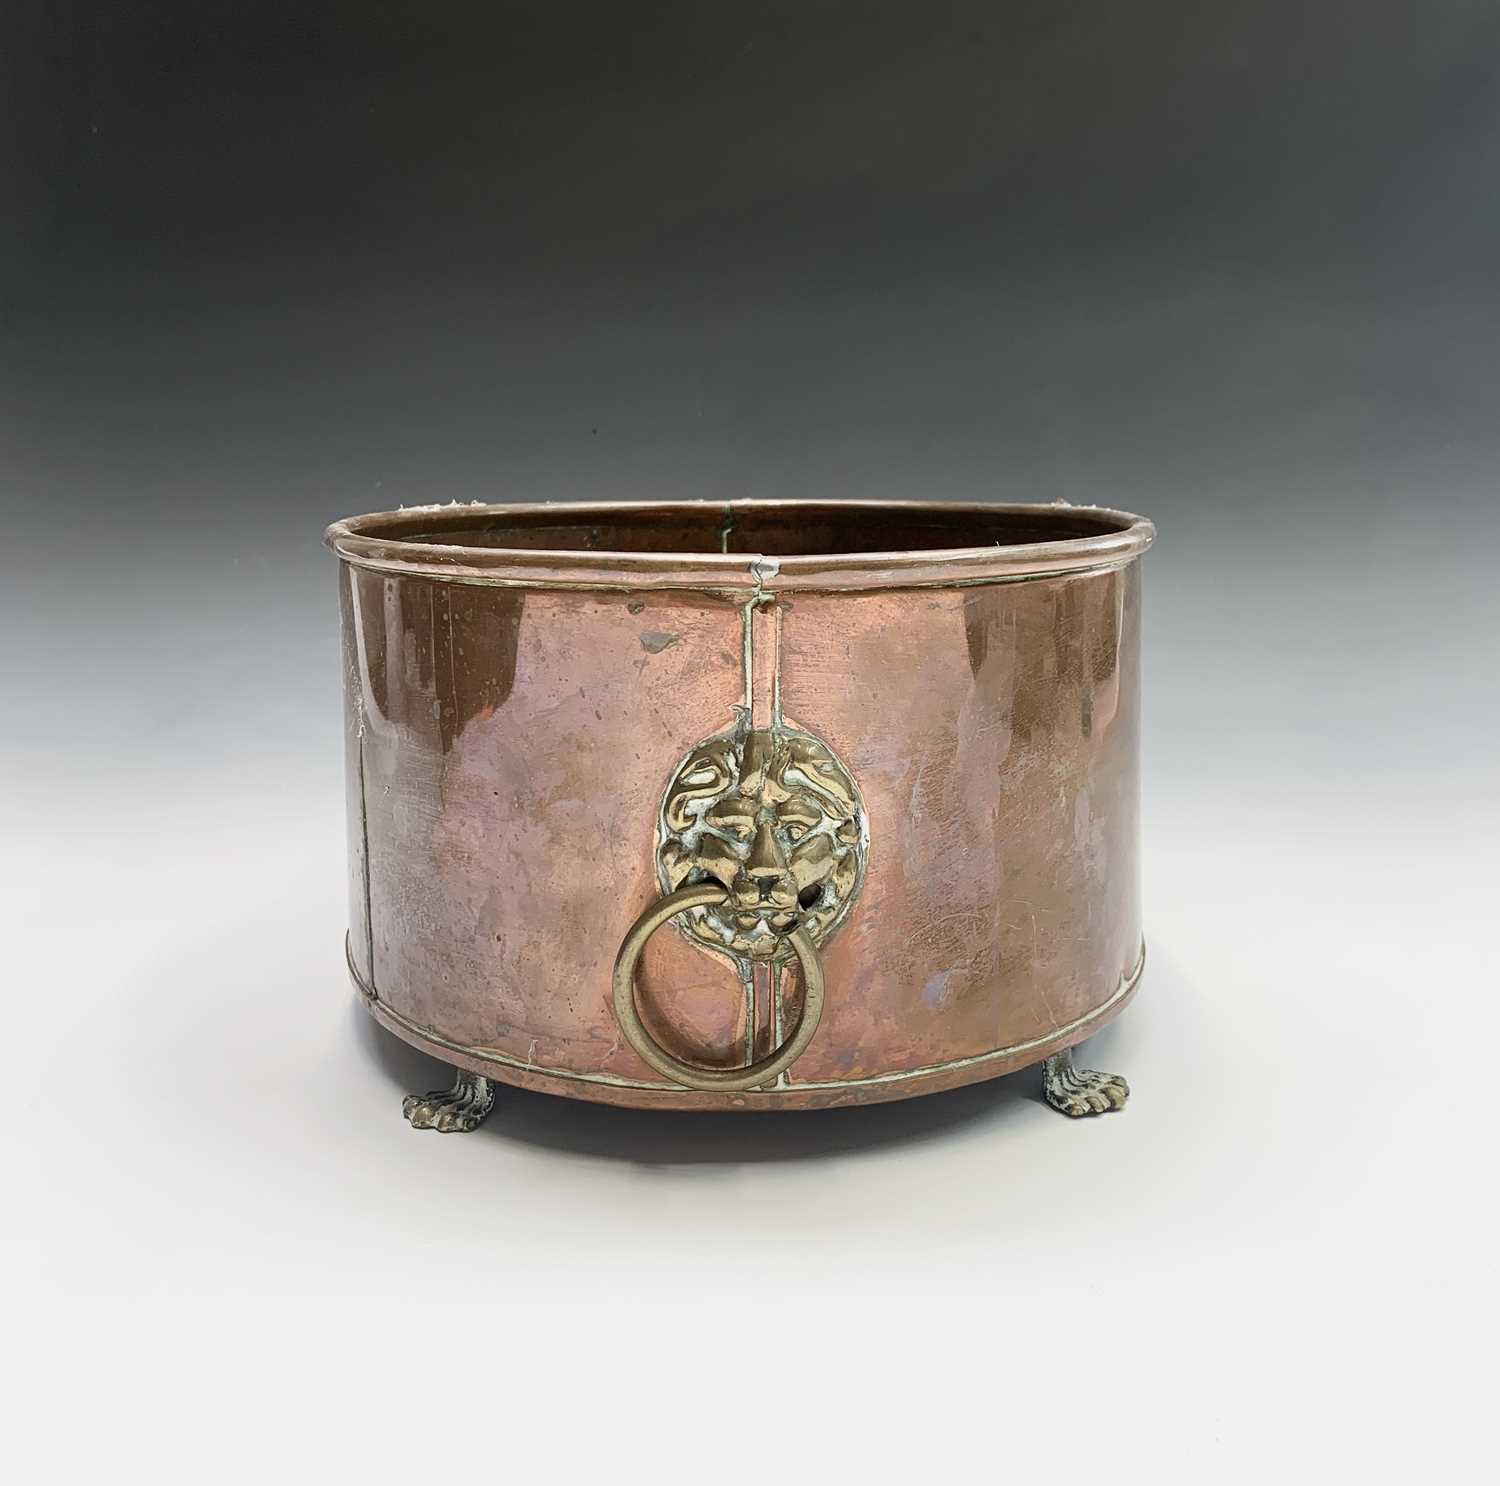 A copper plant trough of oval form, with brass lion's mask handles and paw feet. Height 15.5cm, - Image 2 of 2